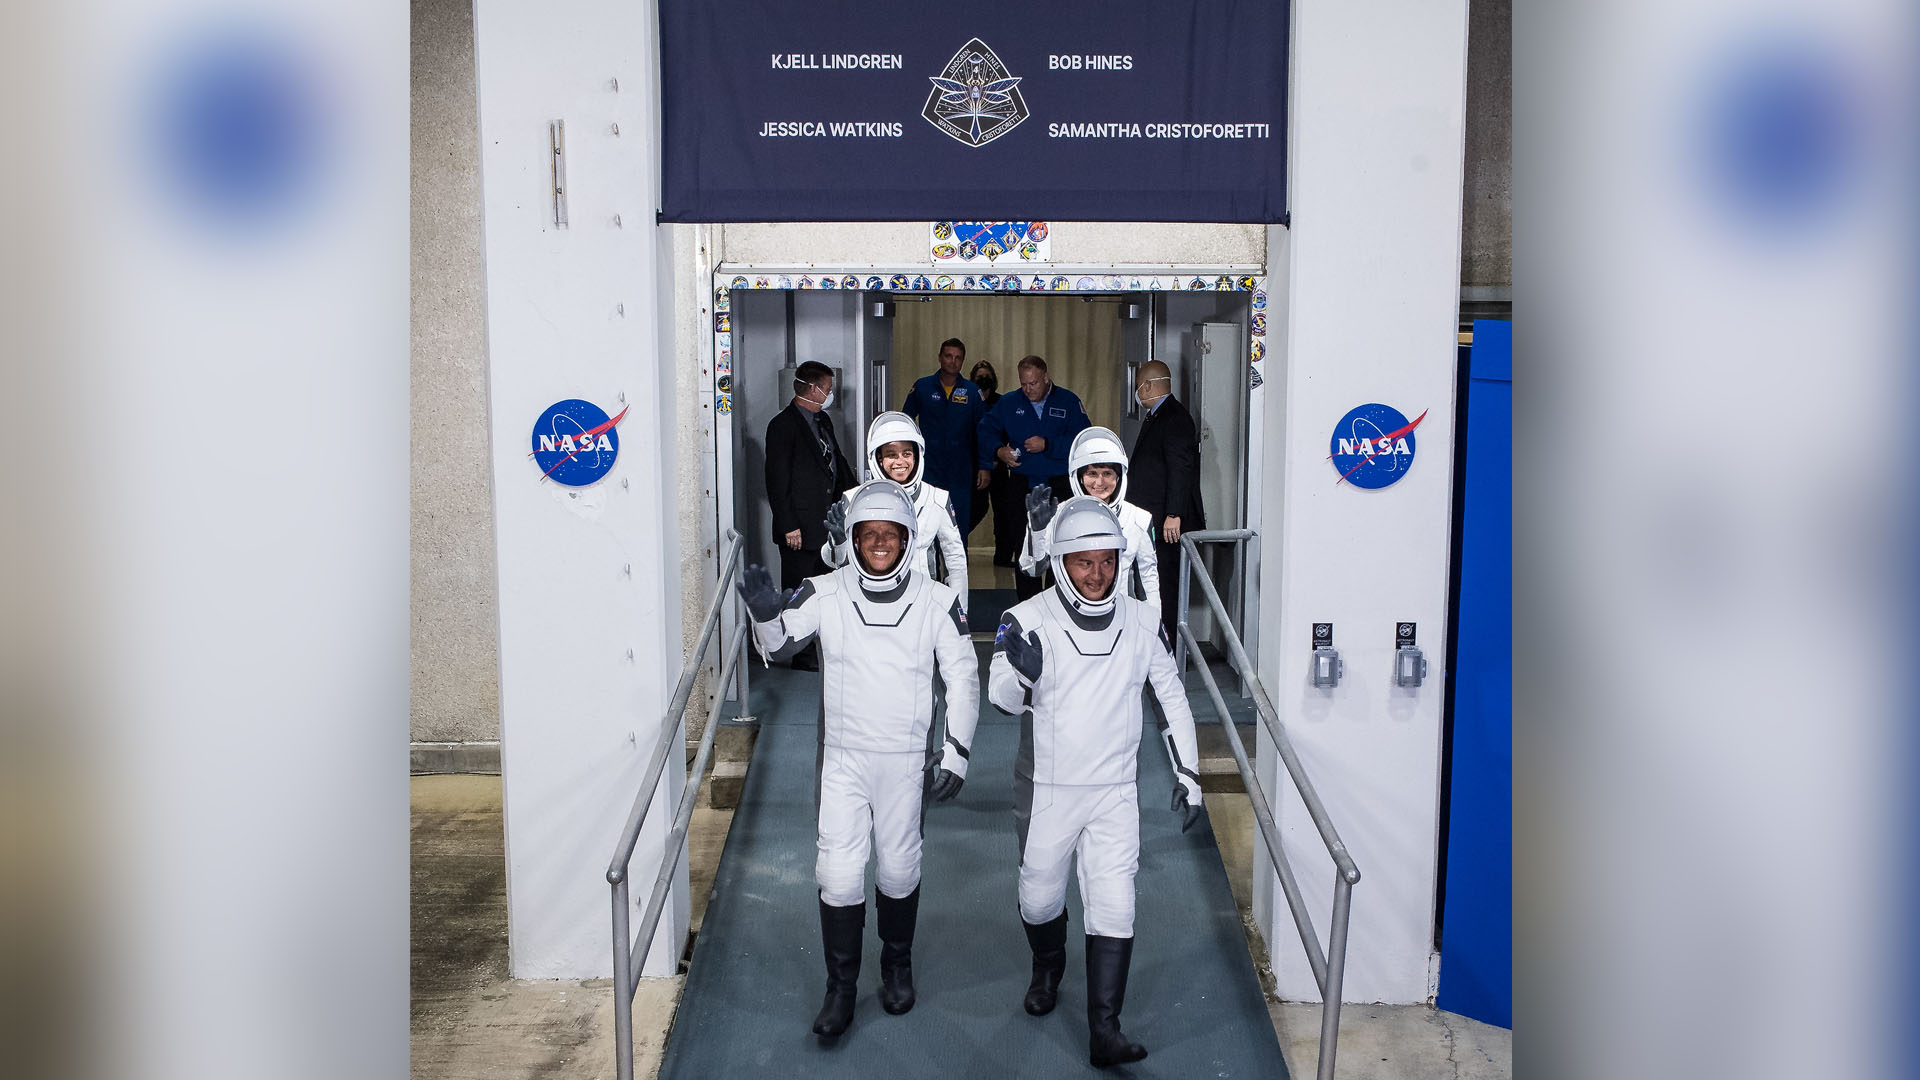 NASA astronauts Robert Hines, left, Kjell Lindgren, right, Jessica Watkins, back left, and ESA (European Space Agency) astronaut Samantha Cristoforetti, wearing SpaceX spacesuits, are seen as they prepare to depart the Neil A. Armstrong Operations and Checkout Building for Launch Complex 39A to board the SpaceX Crew Dragon spacecraft for the Crew-4 mission launch, Wednesday, April 27, 2022, at NASA’s Kennedy Space Center in Florida.